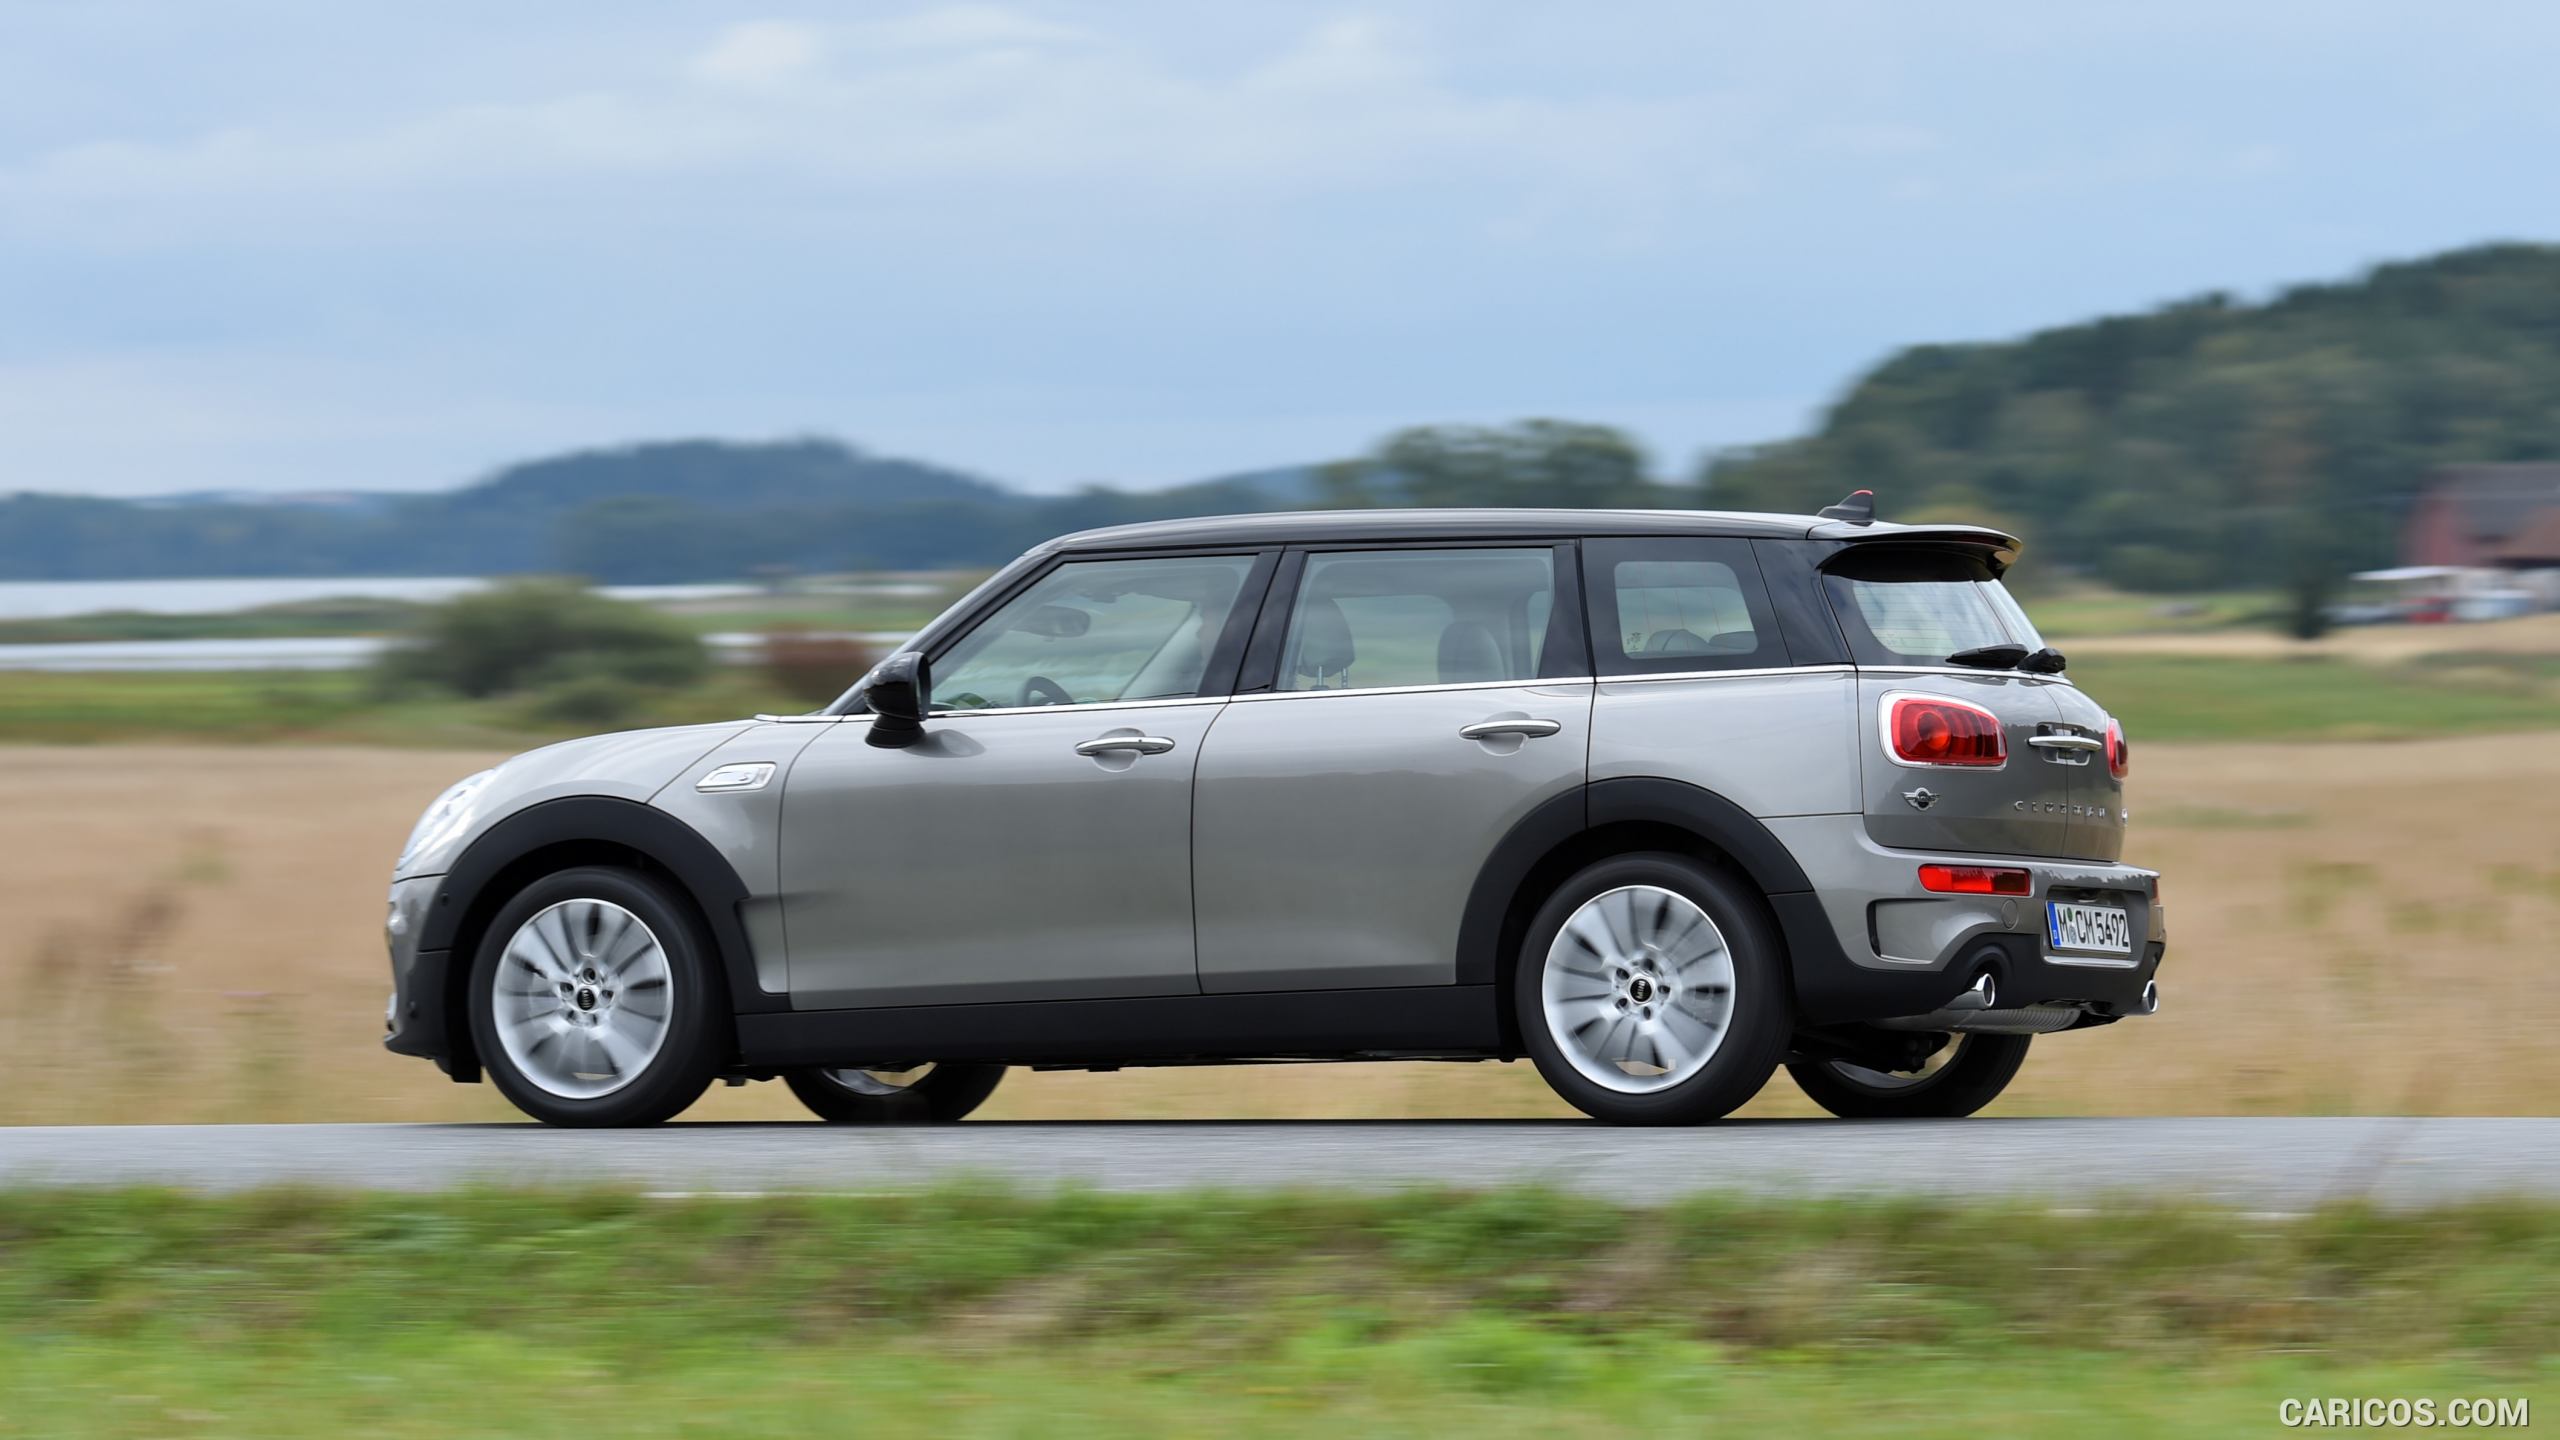 2016 MINI Cooper S Clubman in Metallic Melting Silver - Side, #148 of 380